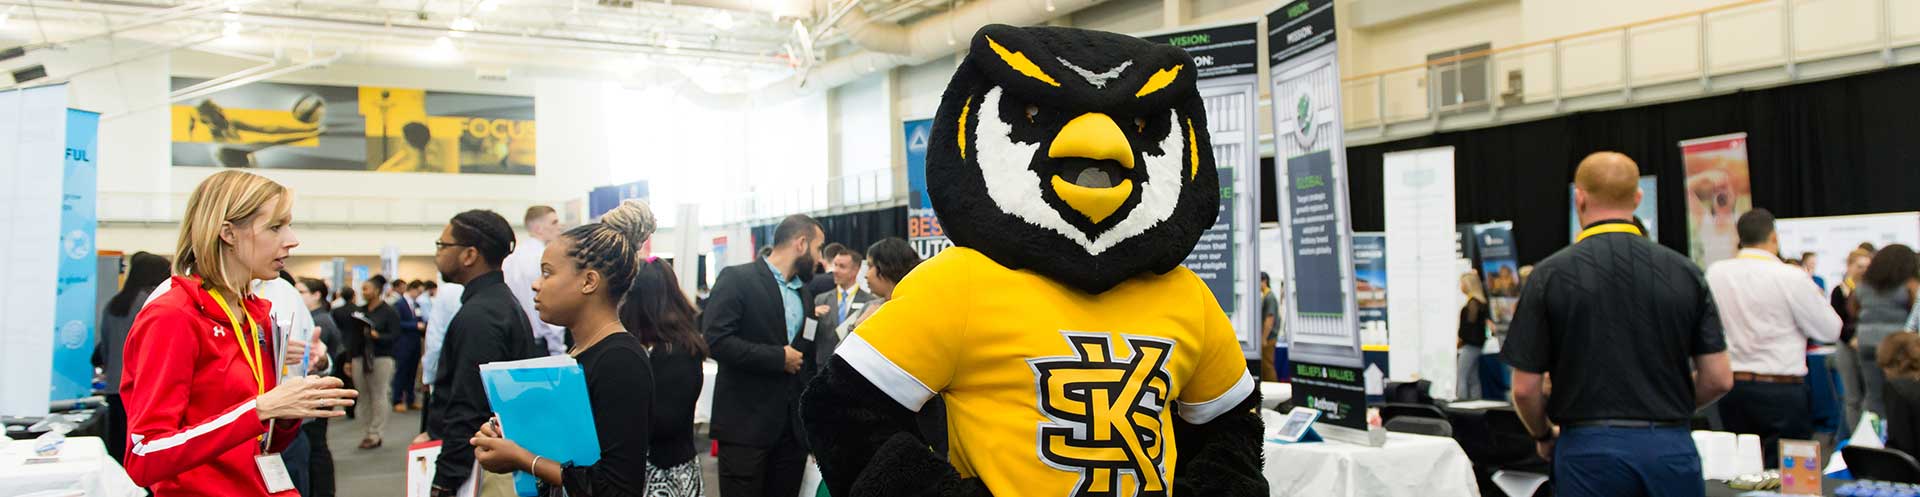 connecting ksu students with perspective employers